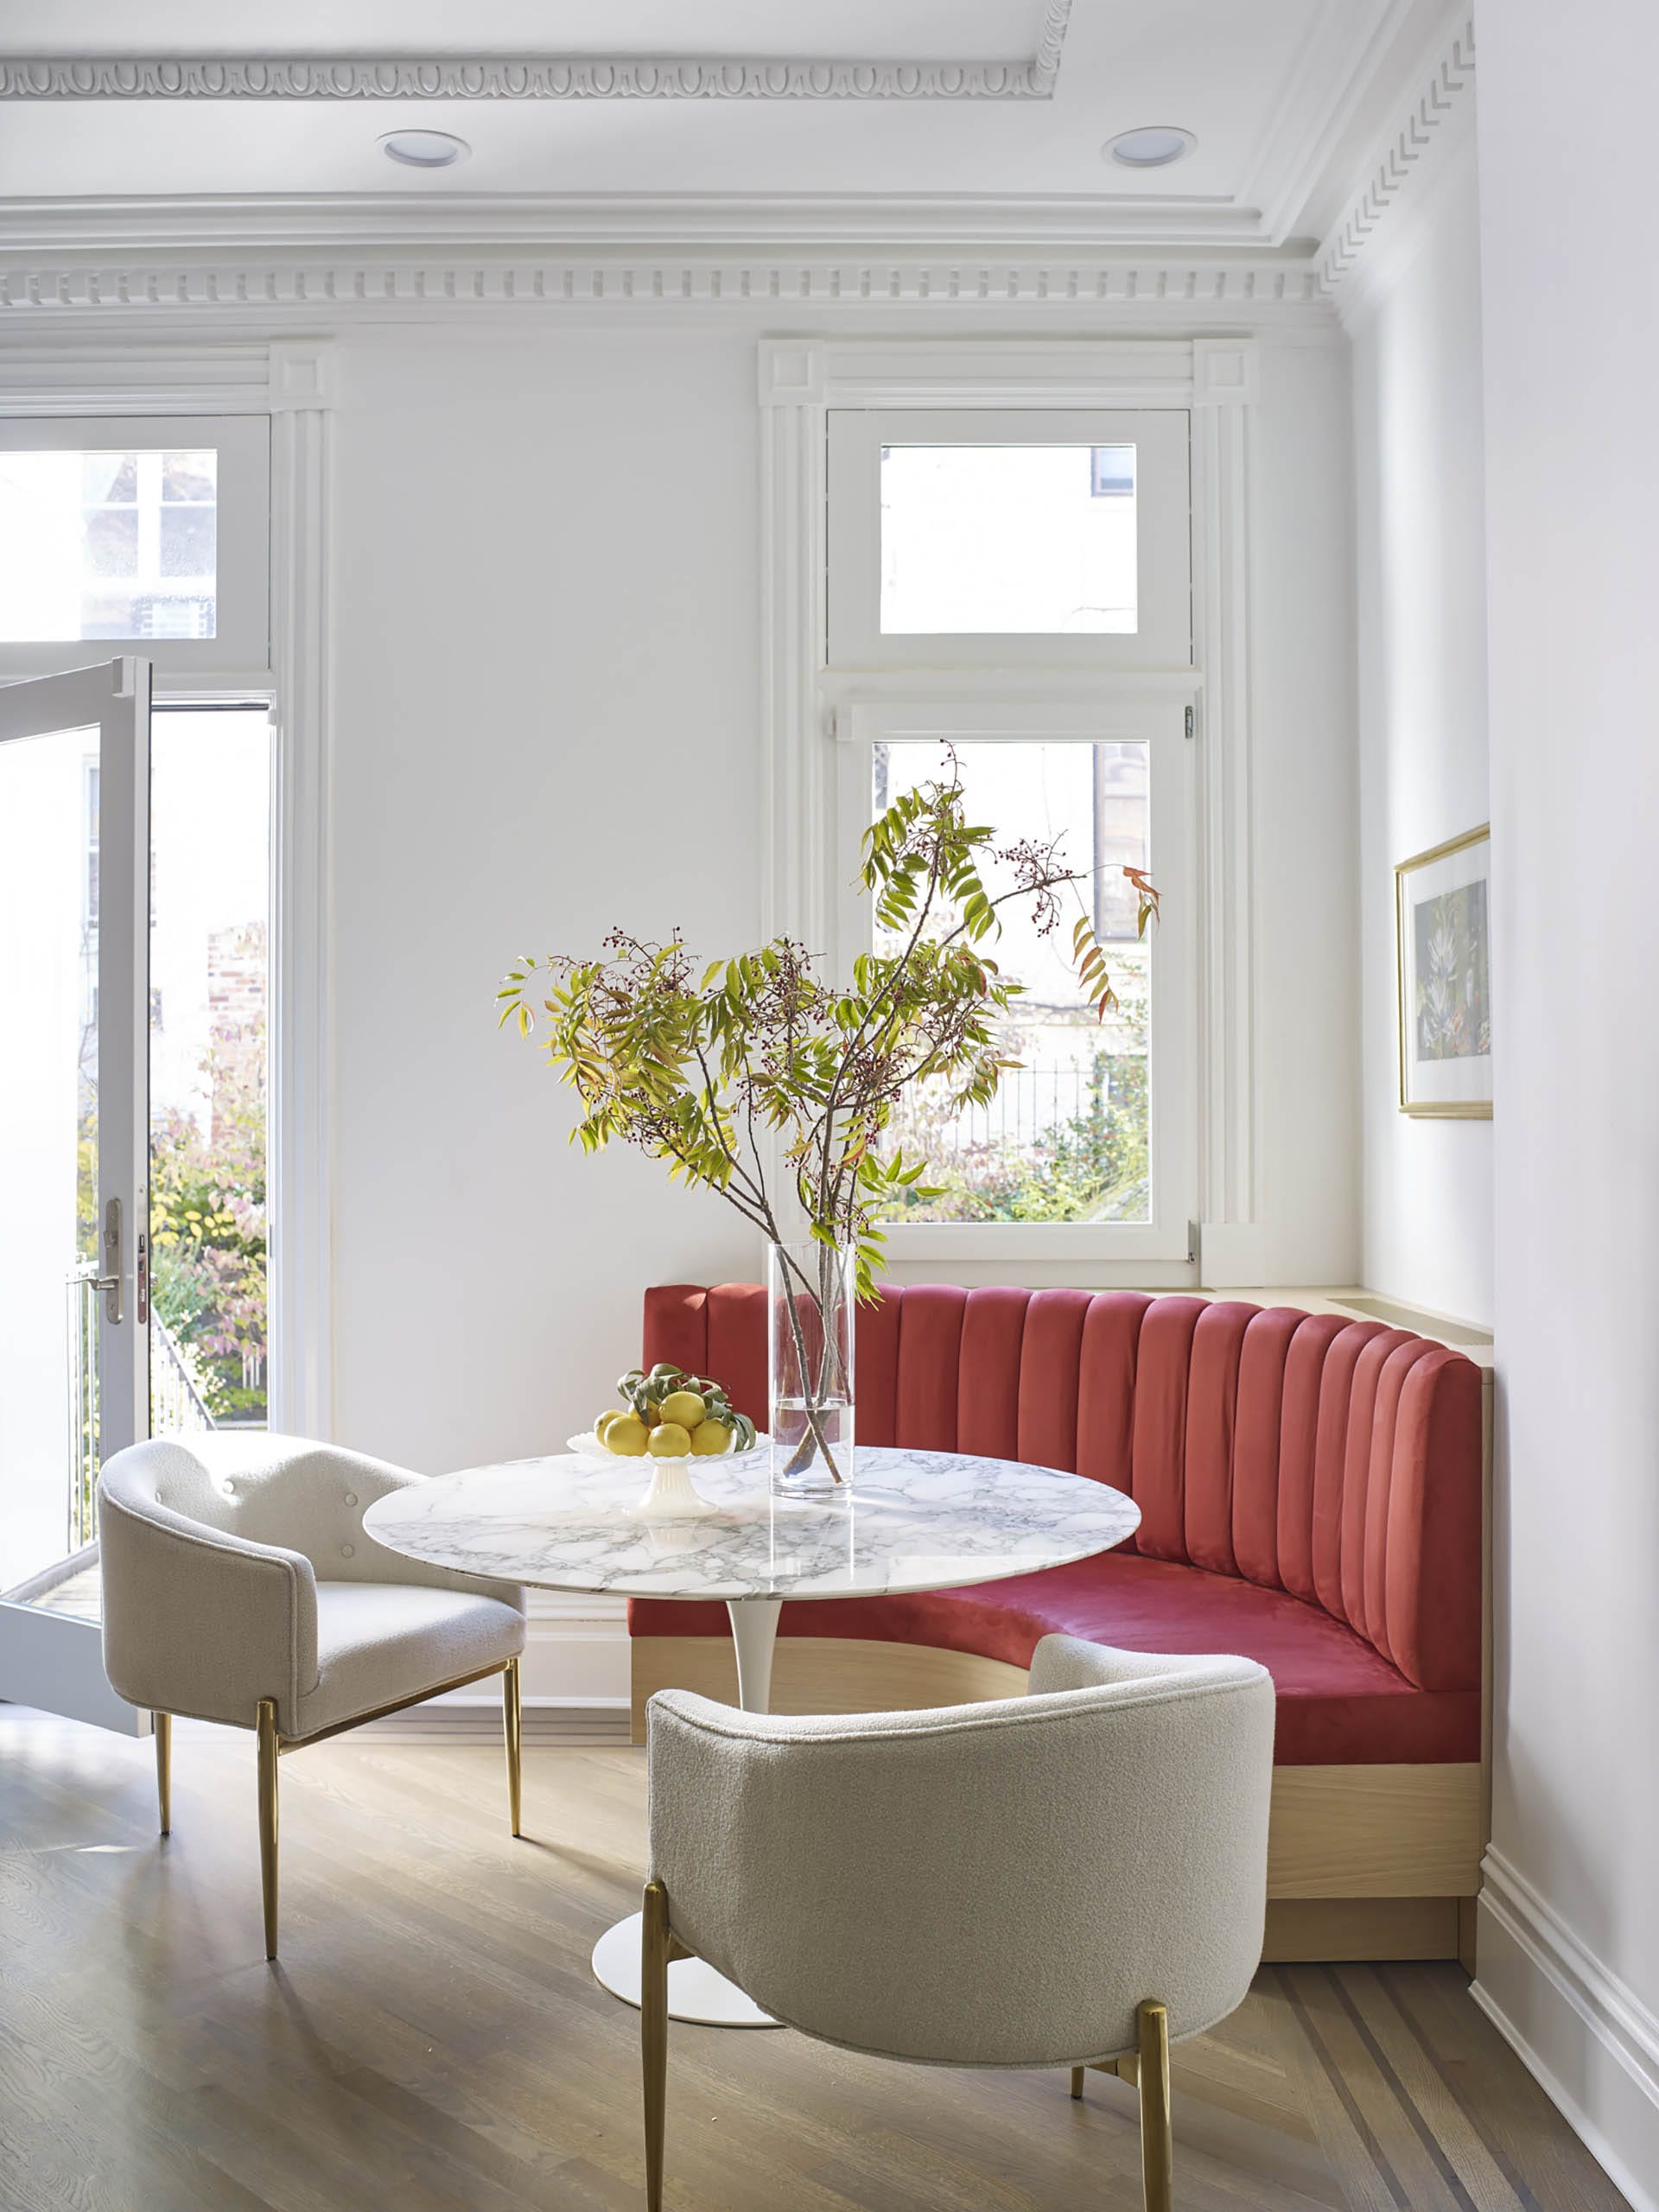 Red banquette in the breakfast nook of a restored kitchen with white painted walls and plaster molding